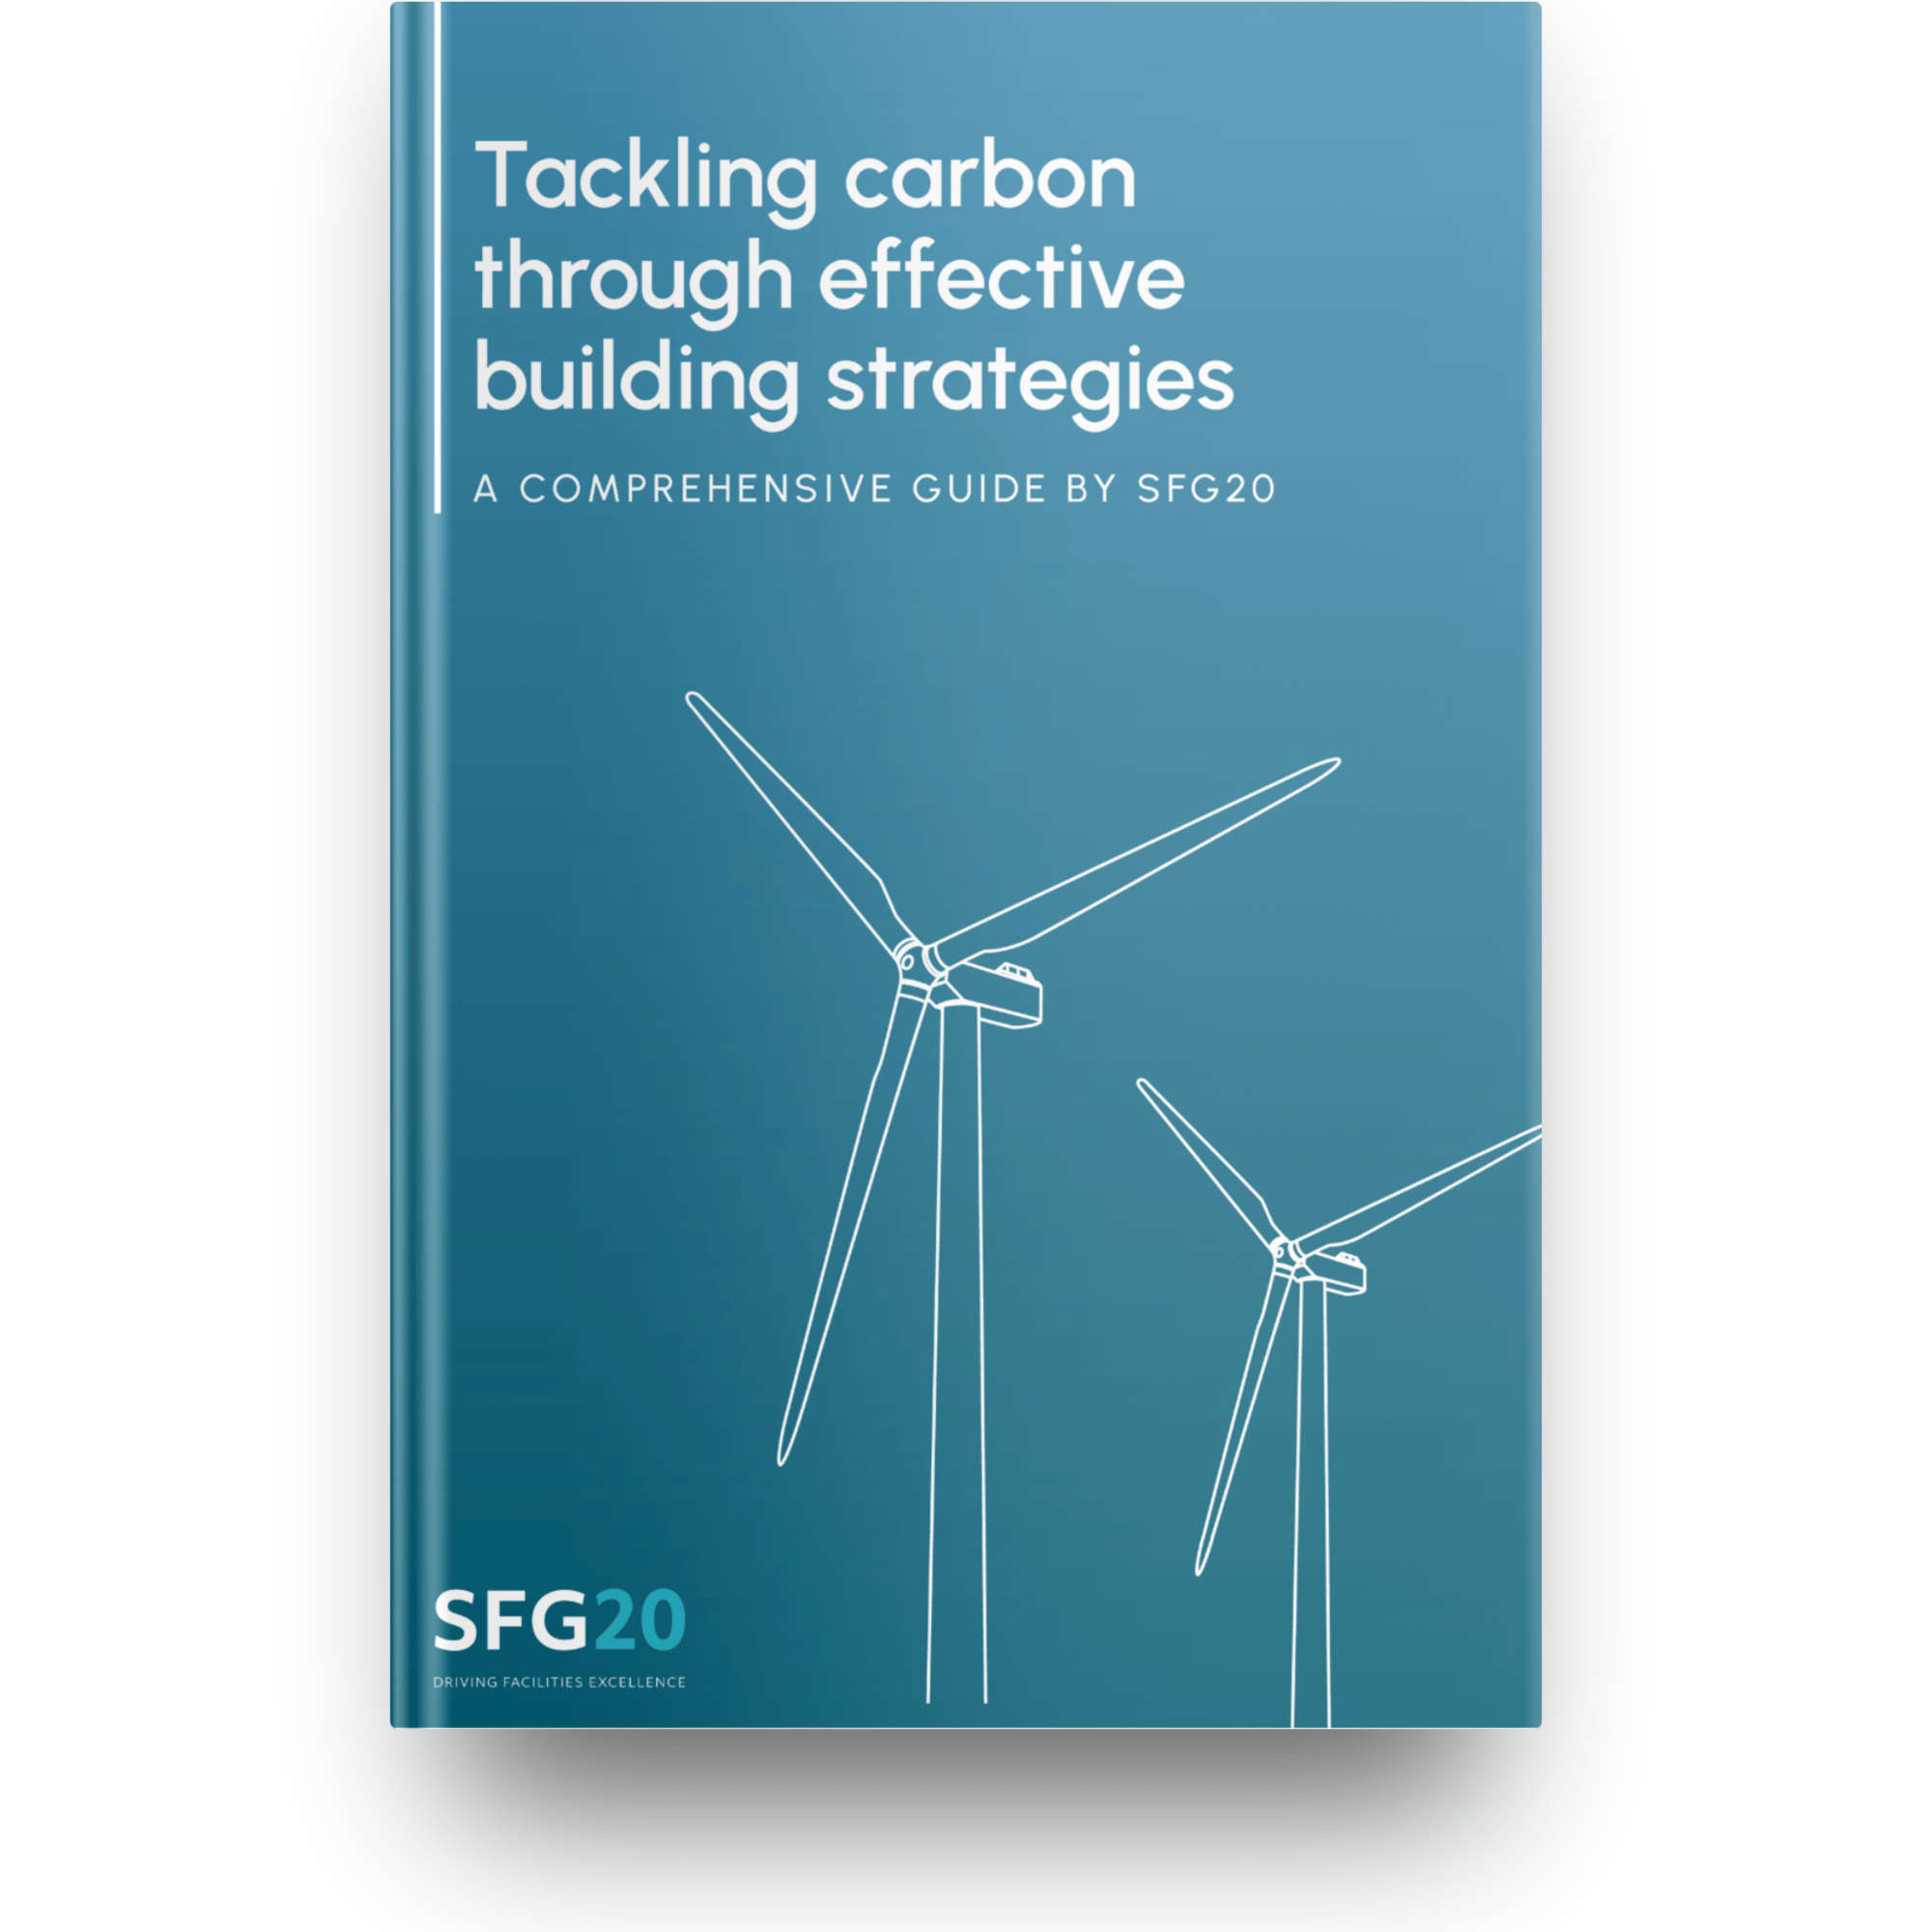 Tackling carbon through effective building strategies